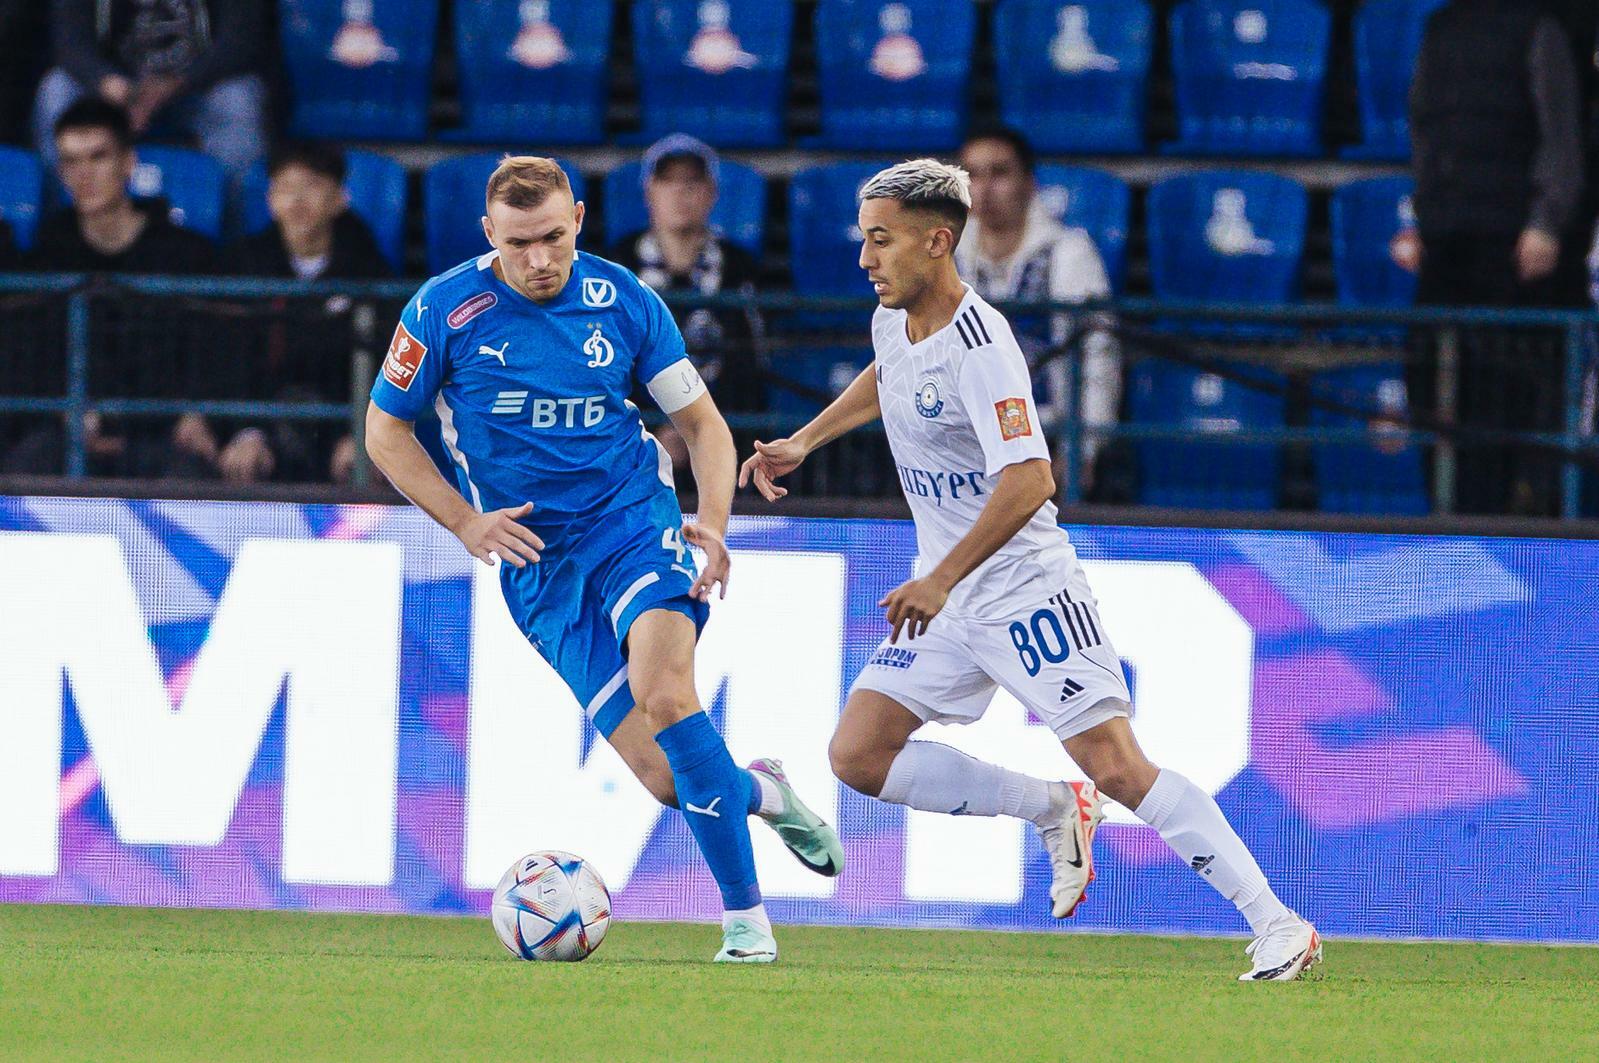 Match Preview "Orenburg" vs "Dynamo": Where to Watch, Our News, and All About the Opponent